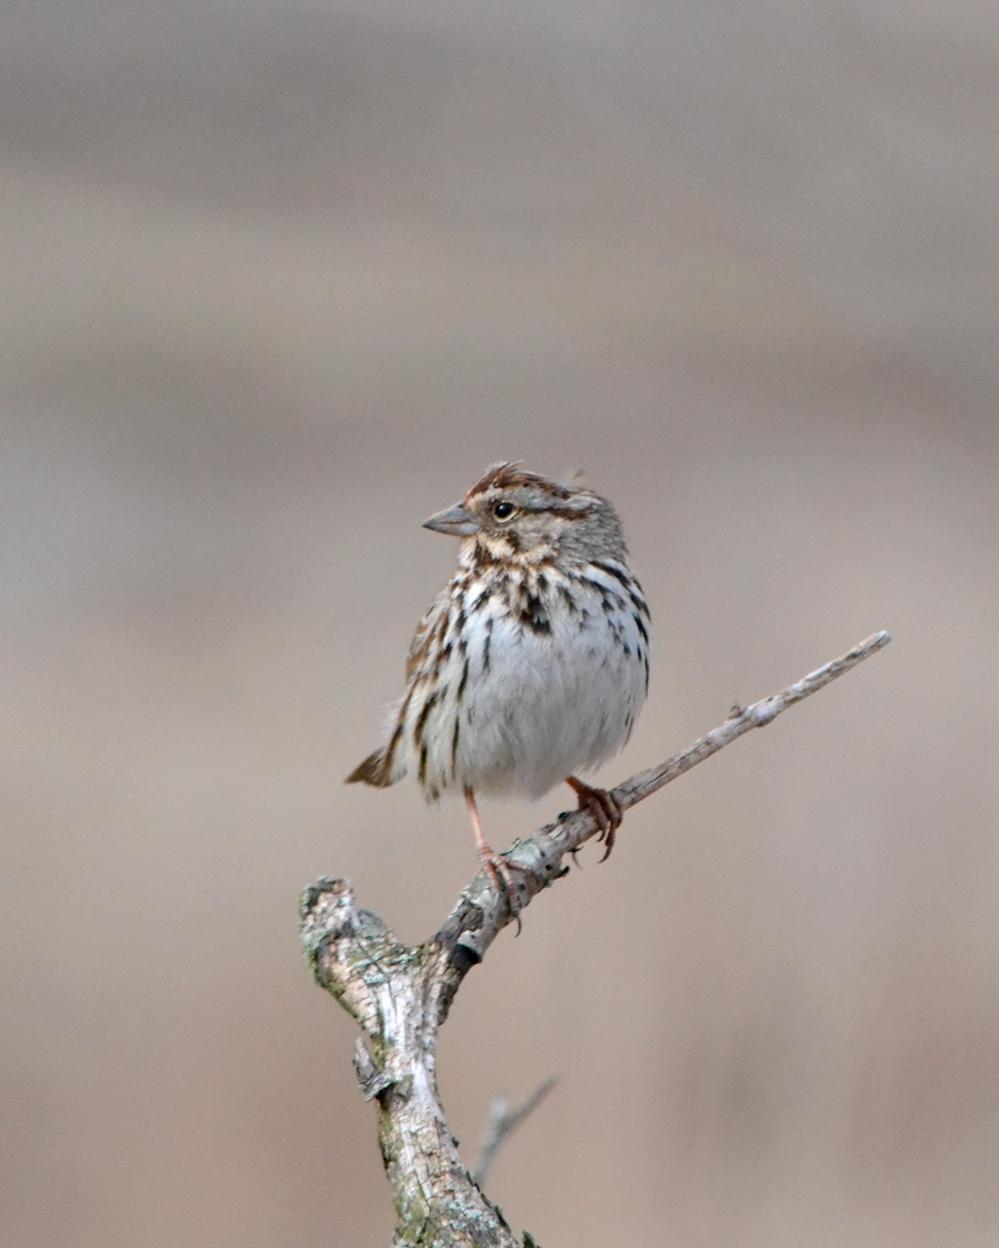 Song Sparrow Photo by Zachary M. Batren